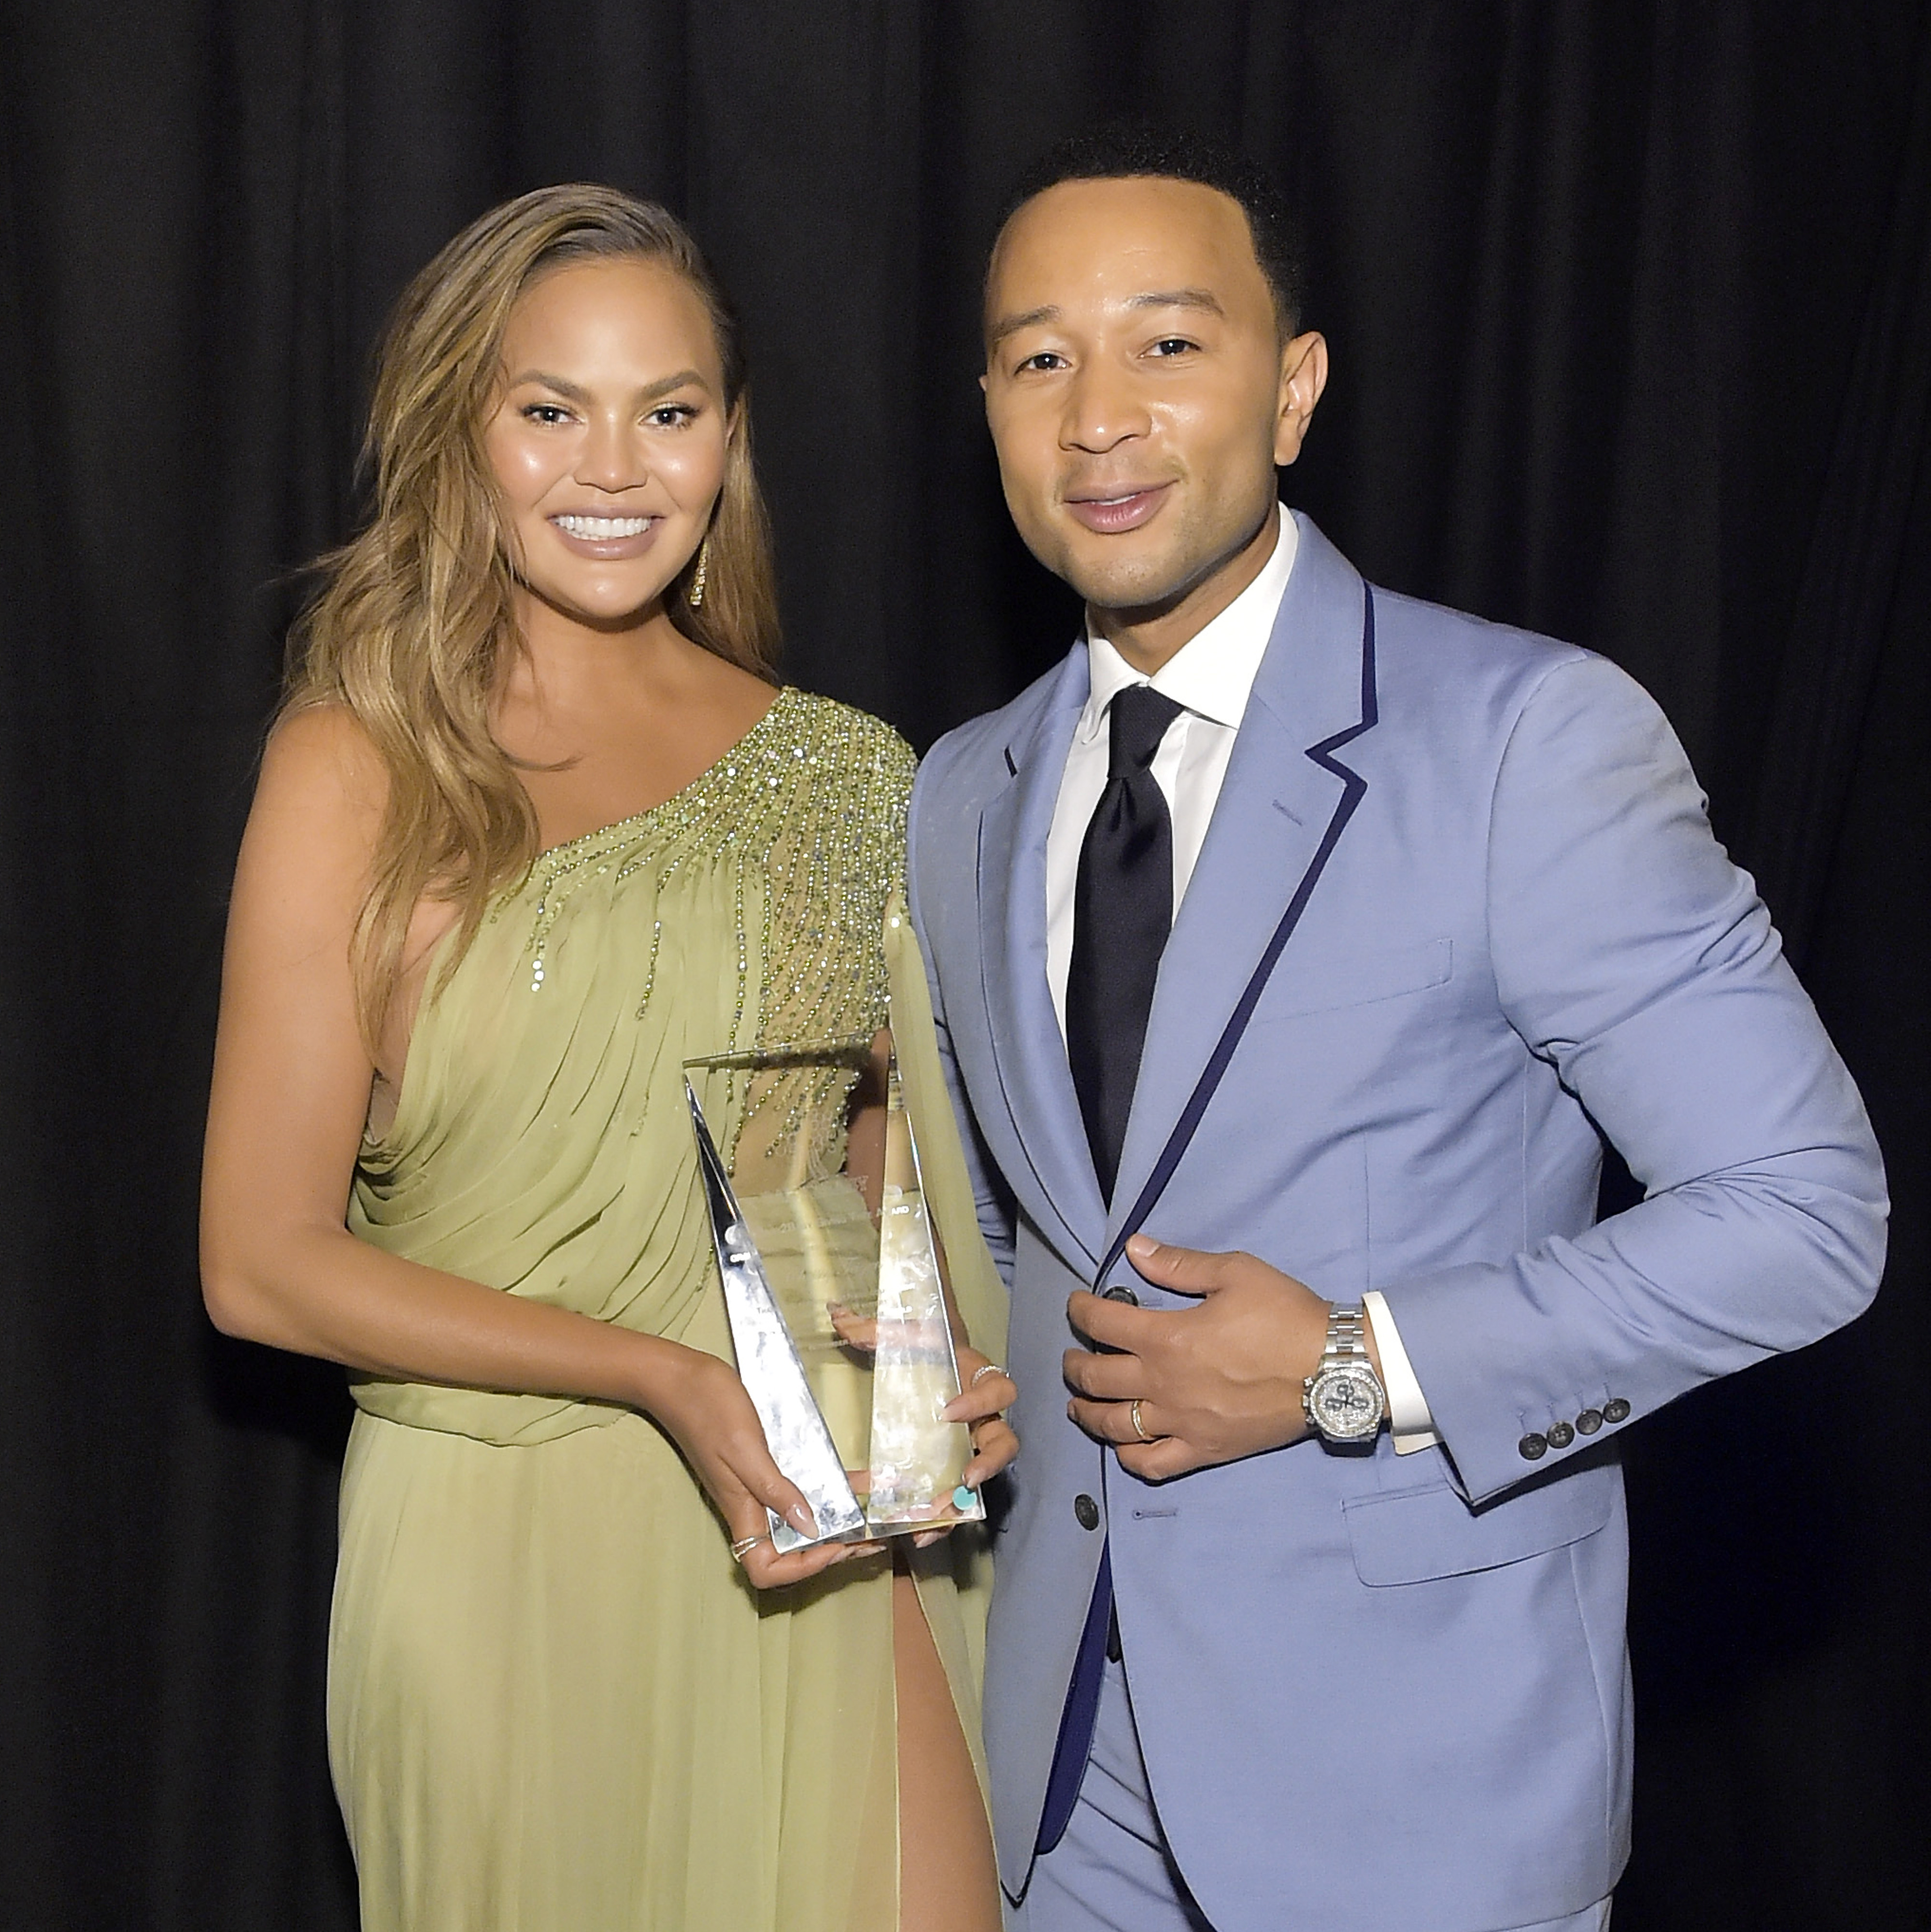 Chrissy Teigen and John Legend attend the 2019 Baby2Baby Gala presented by Paul Mitchel